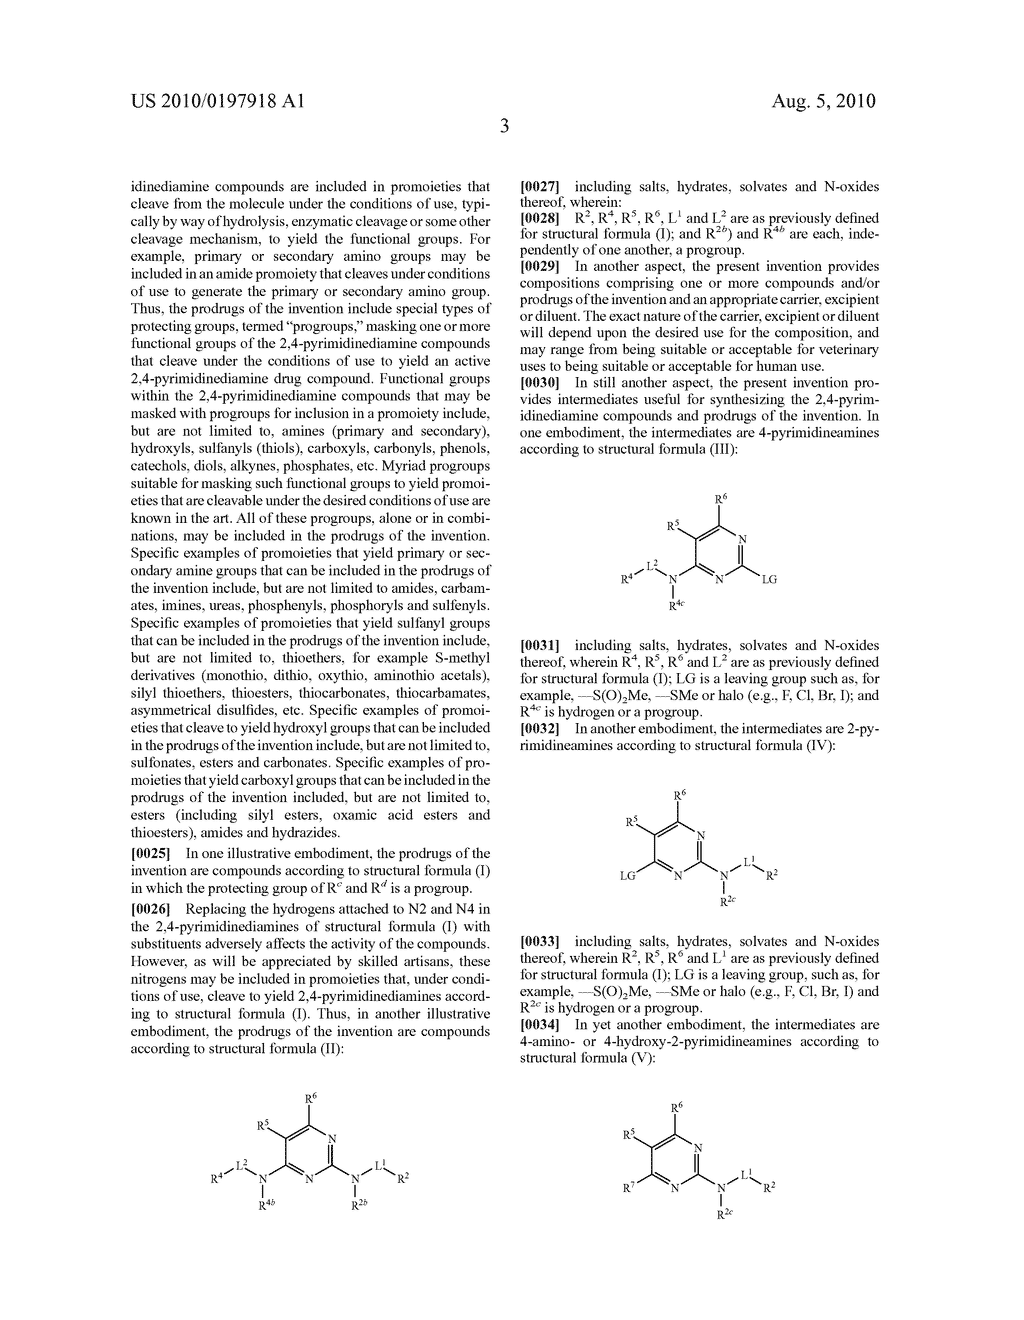 2,4-PYRIMIDINEDIAMINE COMPOUNDS AND THEIR USES - diagram, schematic, and image 18